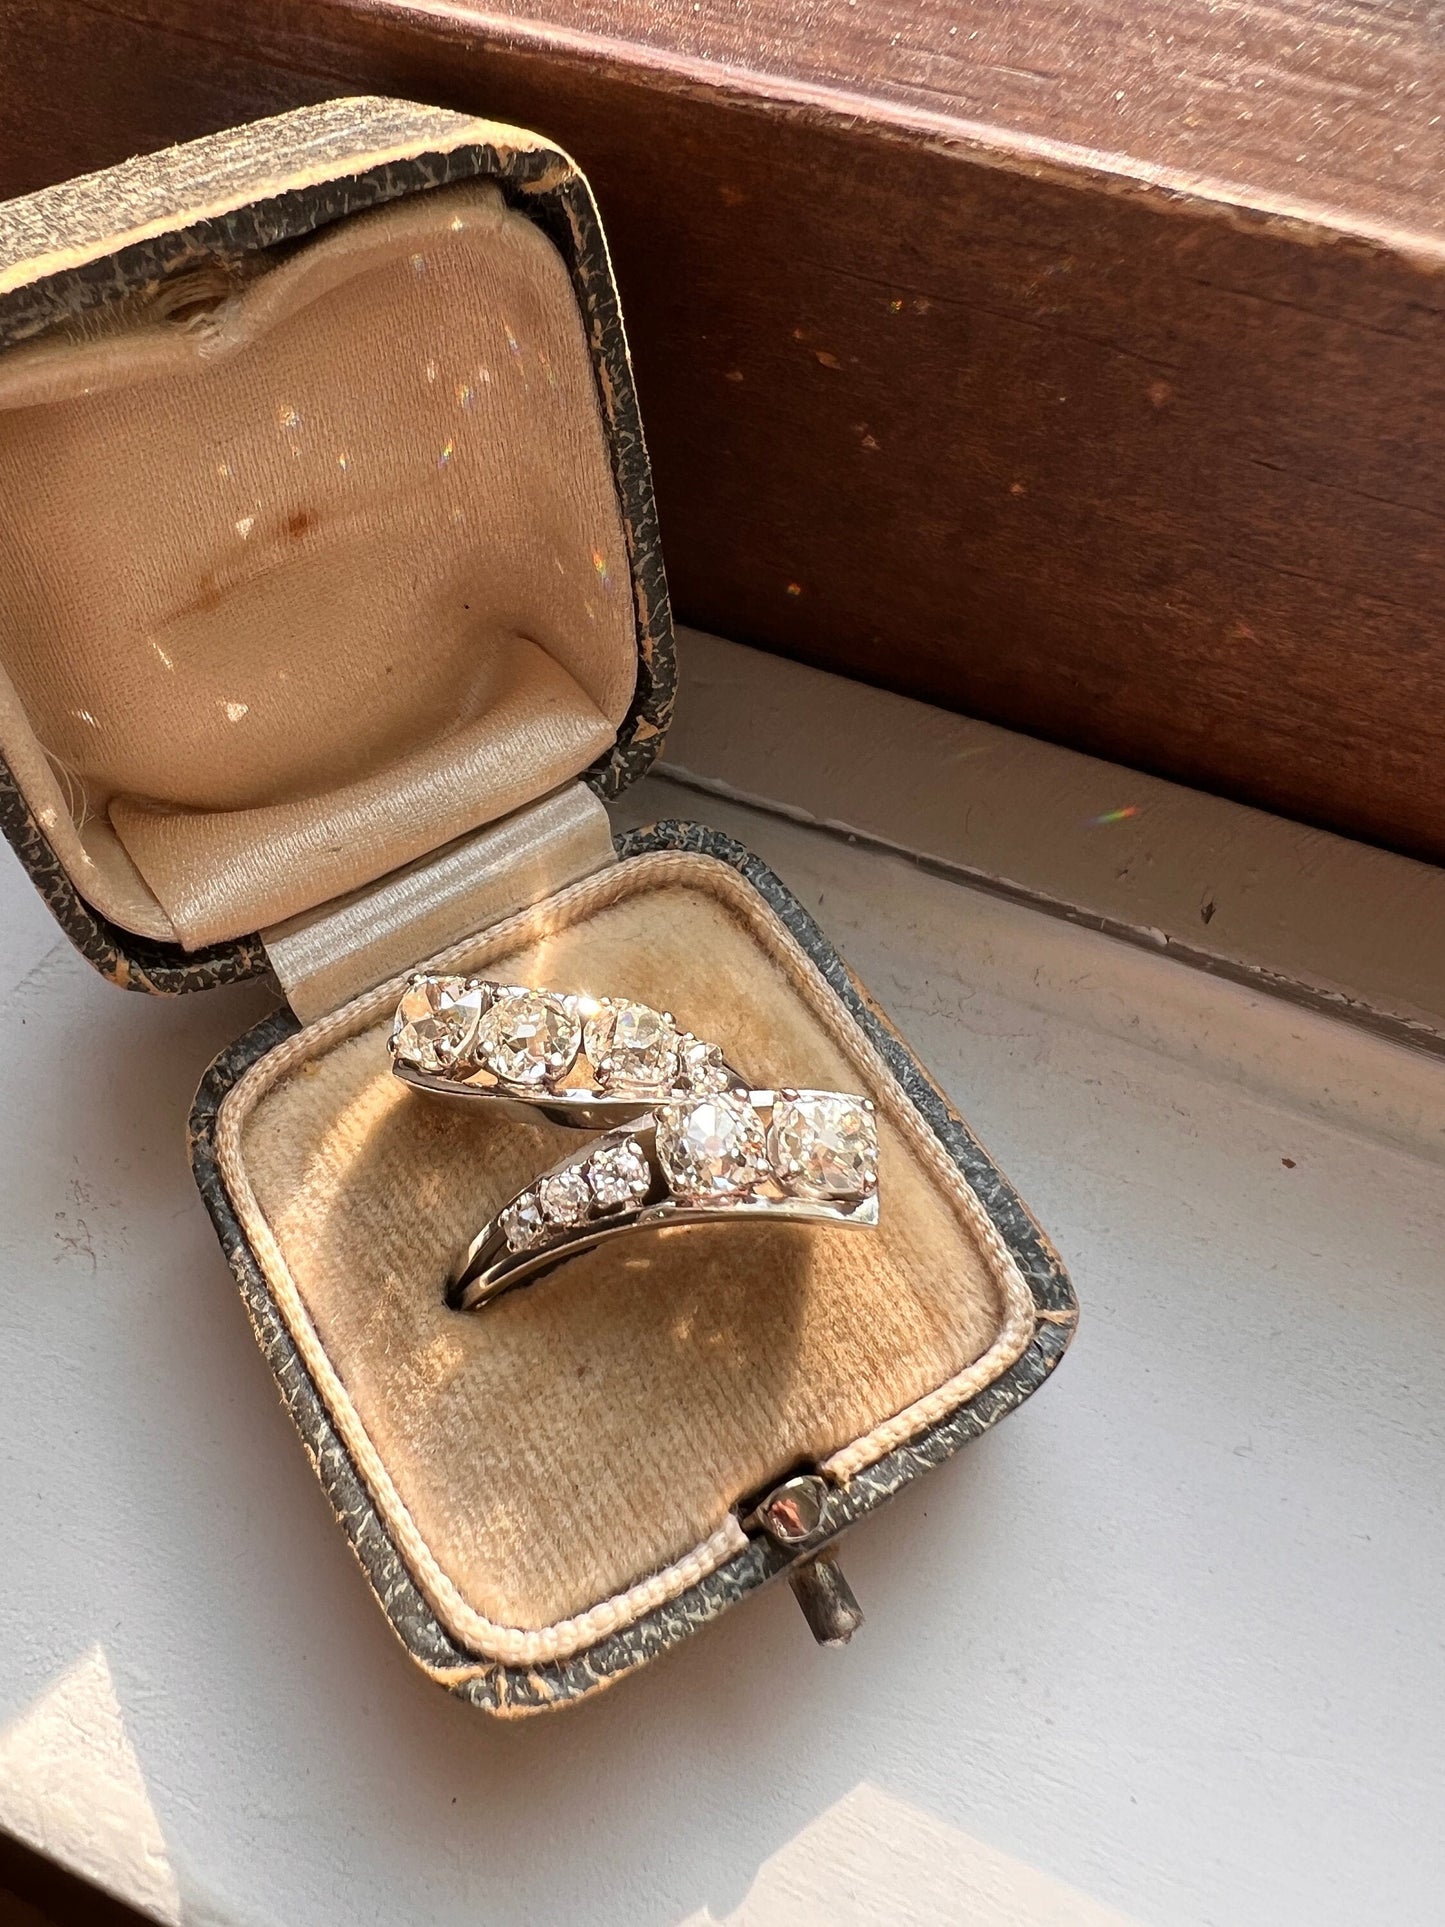 XL French Antique 3 CARATS CHUNKY Old Mine Cut Diamond Ring with Box Bypass 18k White Gold Art Deco Belle Epoque 3Ctw Sparkle OmC Ooak Stack